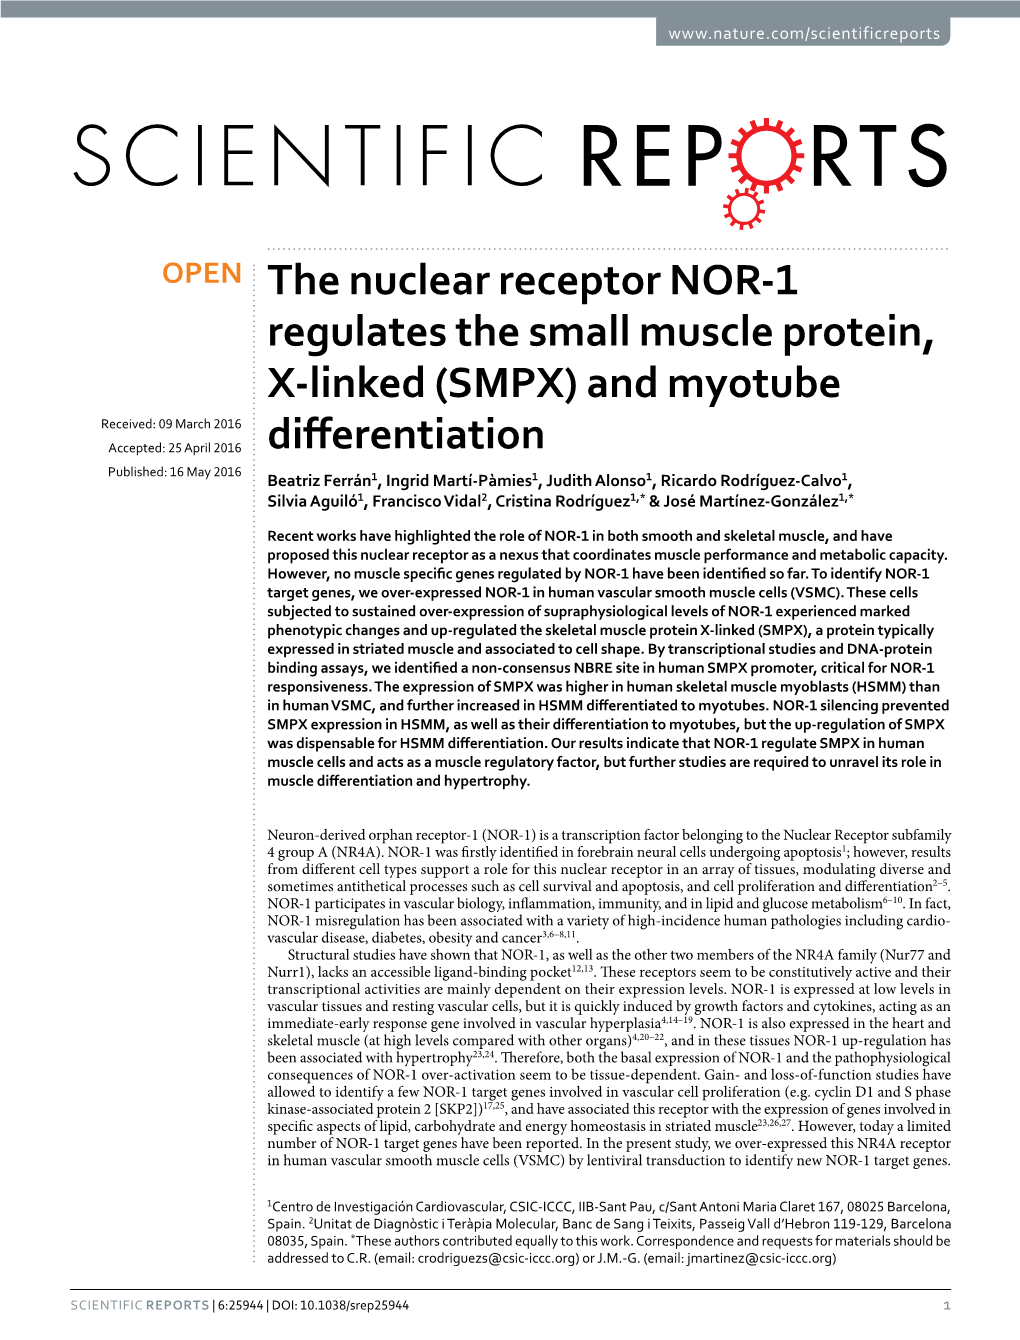 The Nuclear Receptor NOR-1 Regulates the Small Muscle Protein, X-Linked